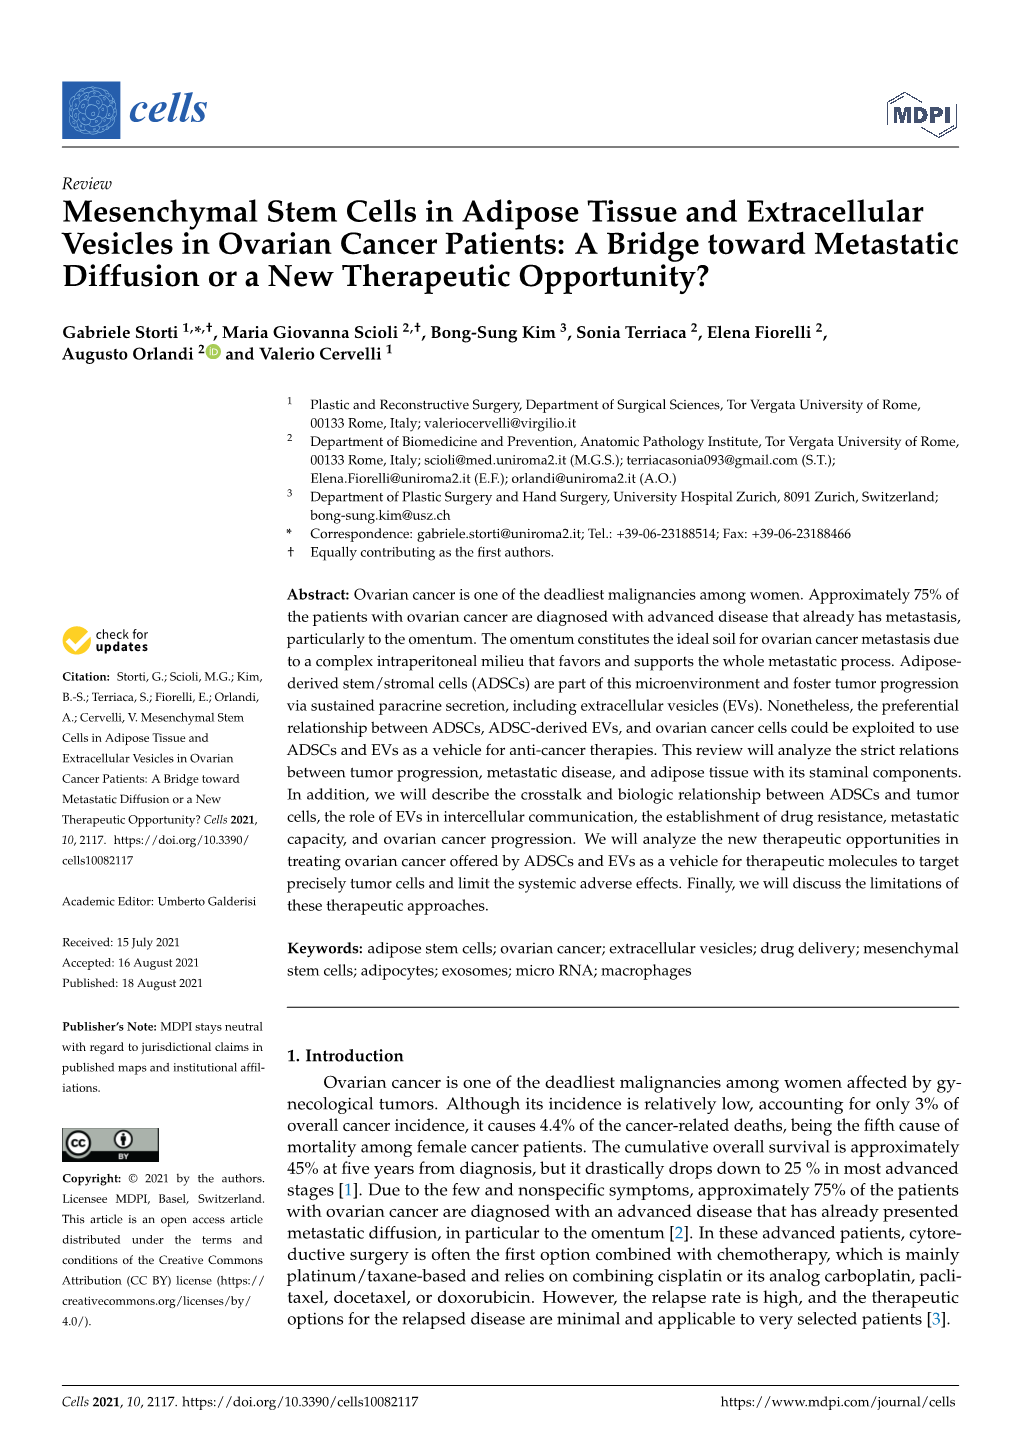 Mesenchymal Stem Cells in Adipose Tissue and Extracellular Vesicles in Ovarian Cancer Patients: a Bridge Toward Metastatic Diffusion Or a New Therapeutic Opportunity?